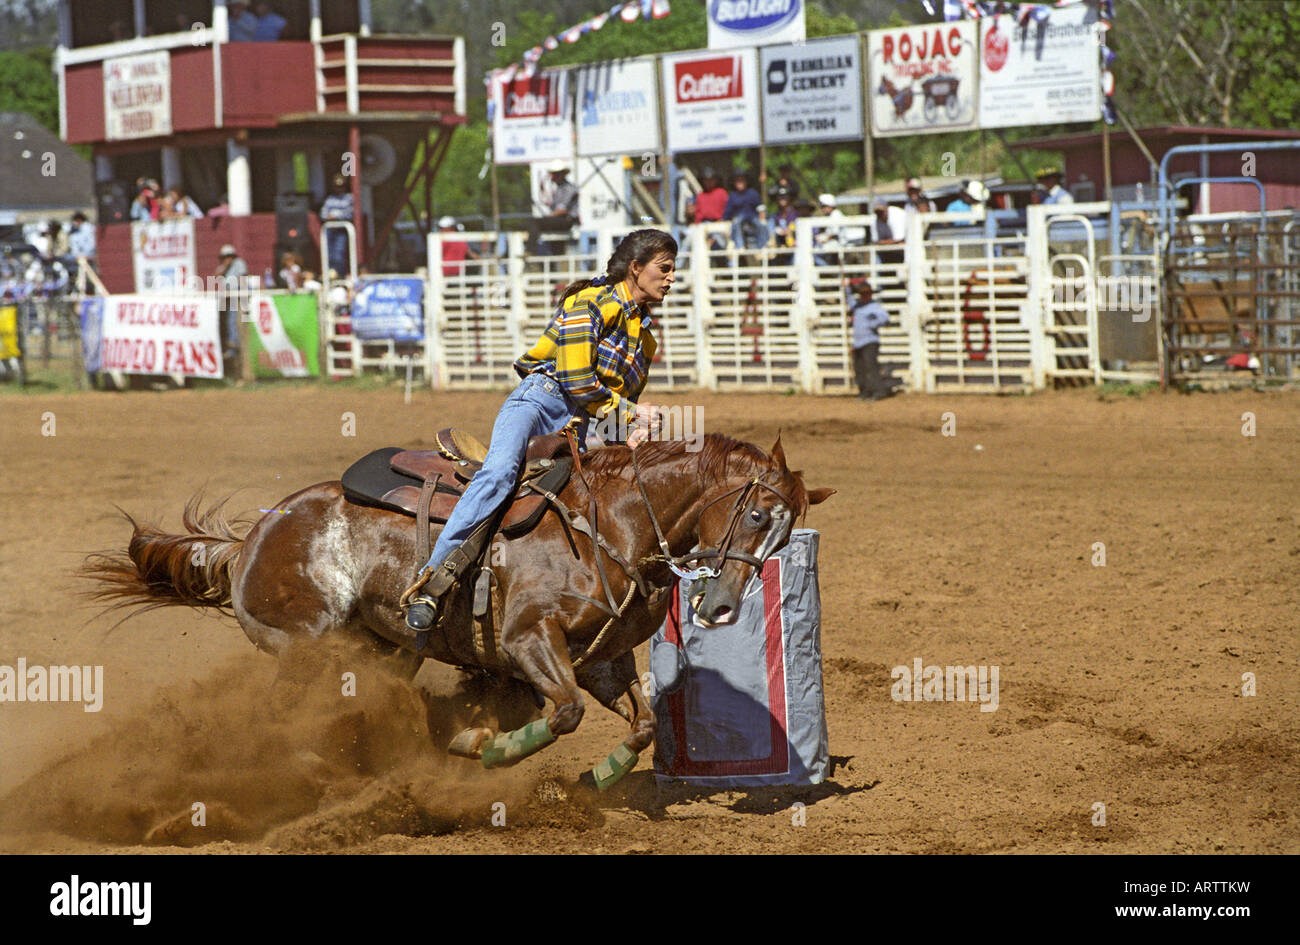 The annual 4th of July Makawao Rodeo, Hawaii's largest rodeo, held in